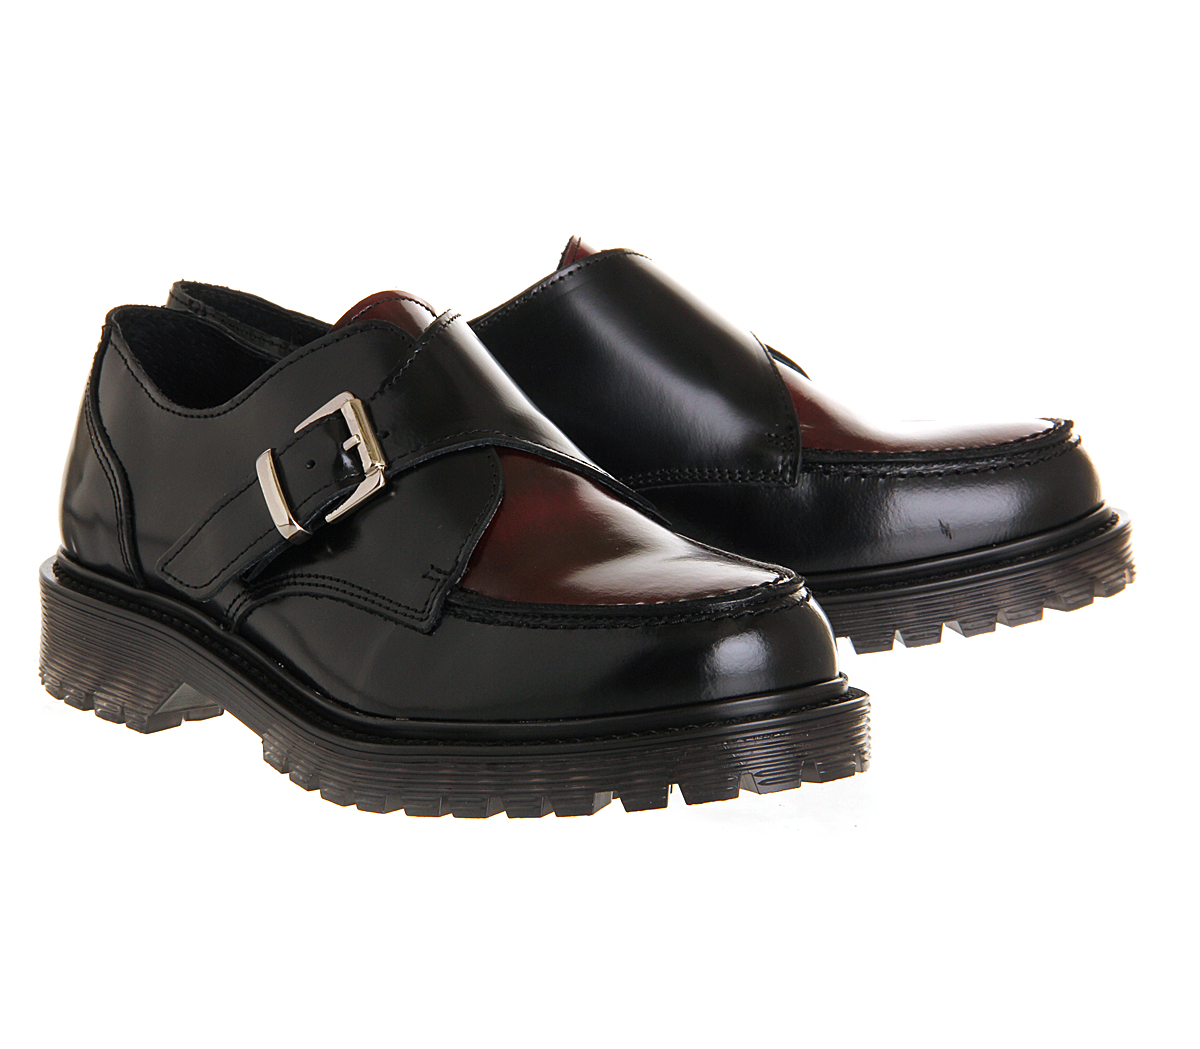 OFFICE Verity Monk Shoe Black Burgundy Leather - Flat Shoes for Women